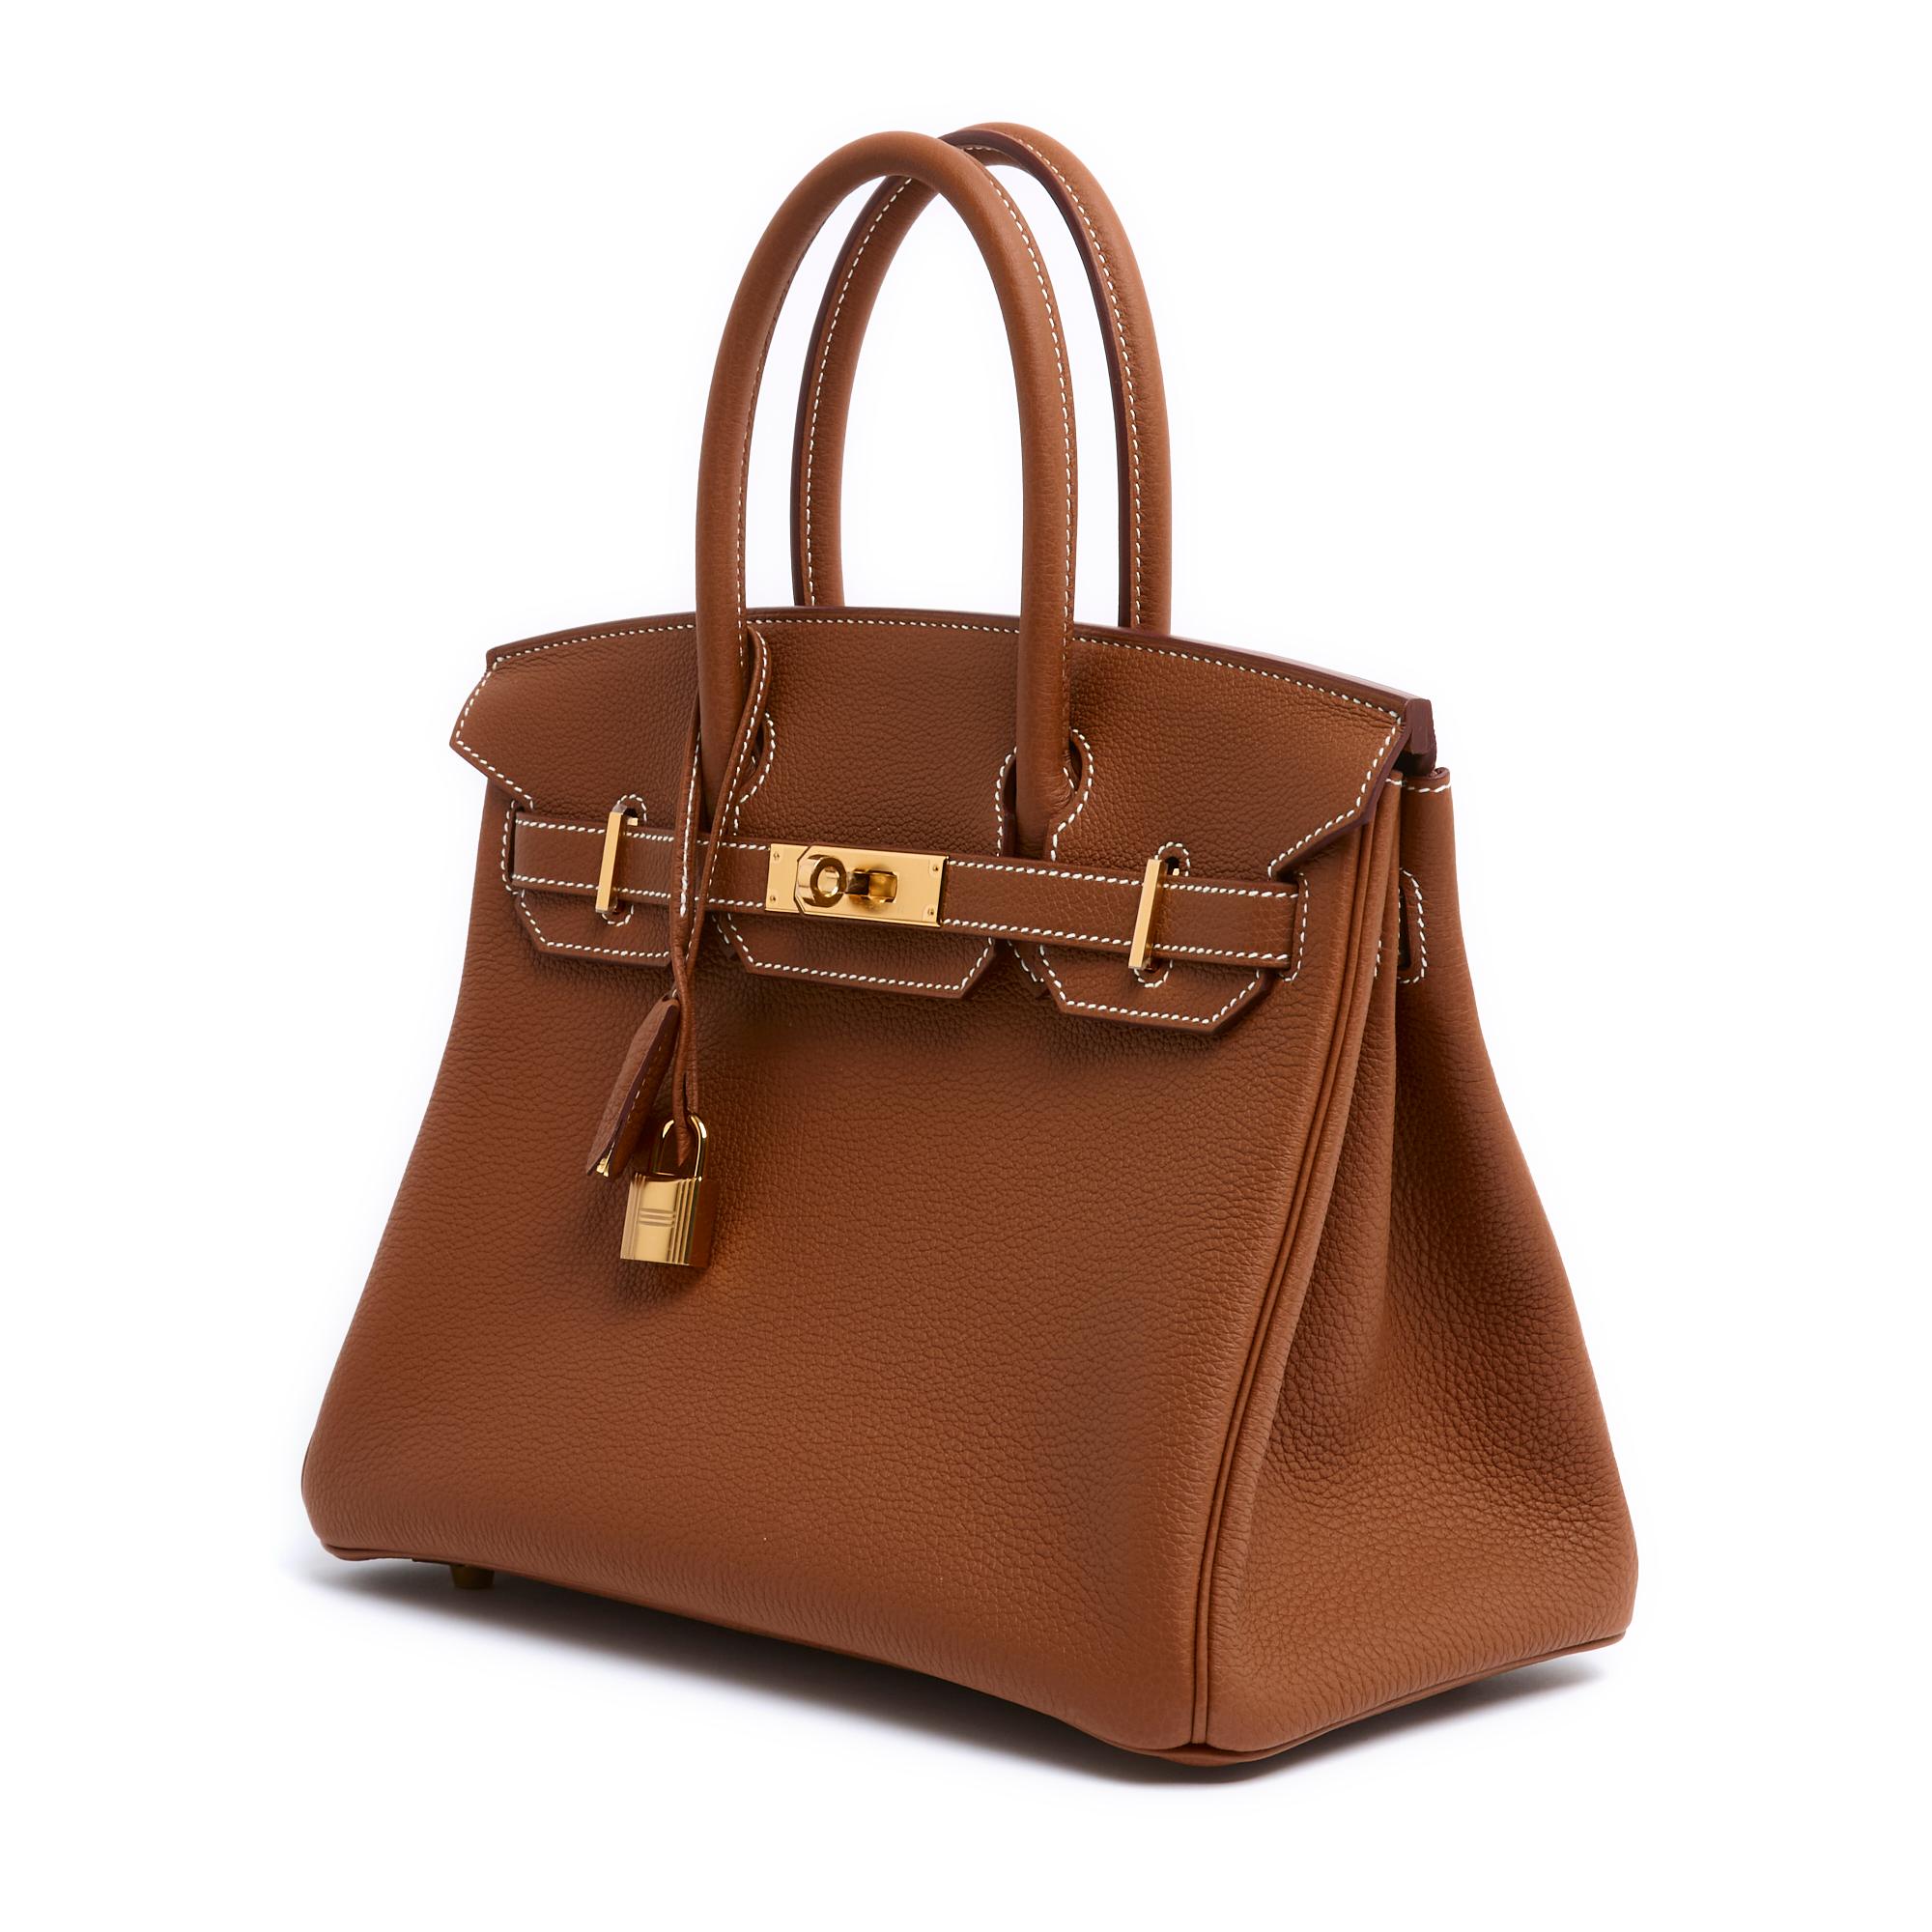 Hermès bag model Birkin size 30 in Togo leather in Gold or Camel color and gold metal, keys, padlock, zipper, bell, delivered in its original box with purchase invoice dated March 2024. Width 30 cm x height 24 cm x depth 16 cm. The bag has never